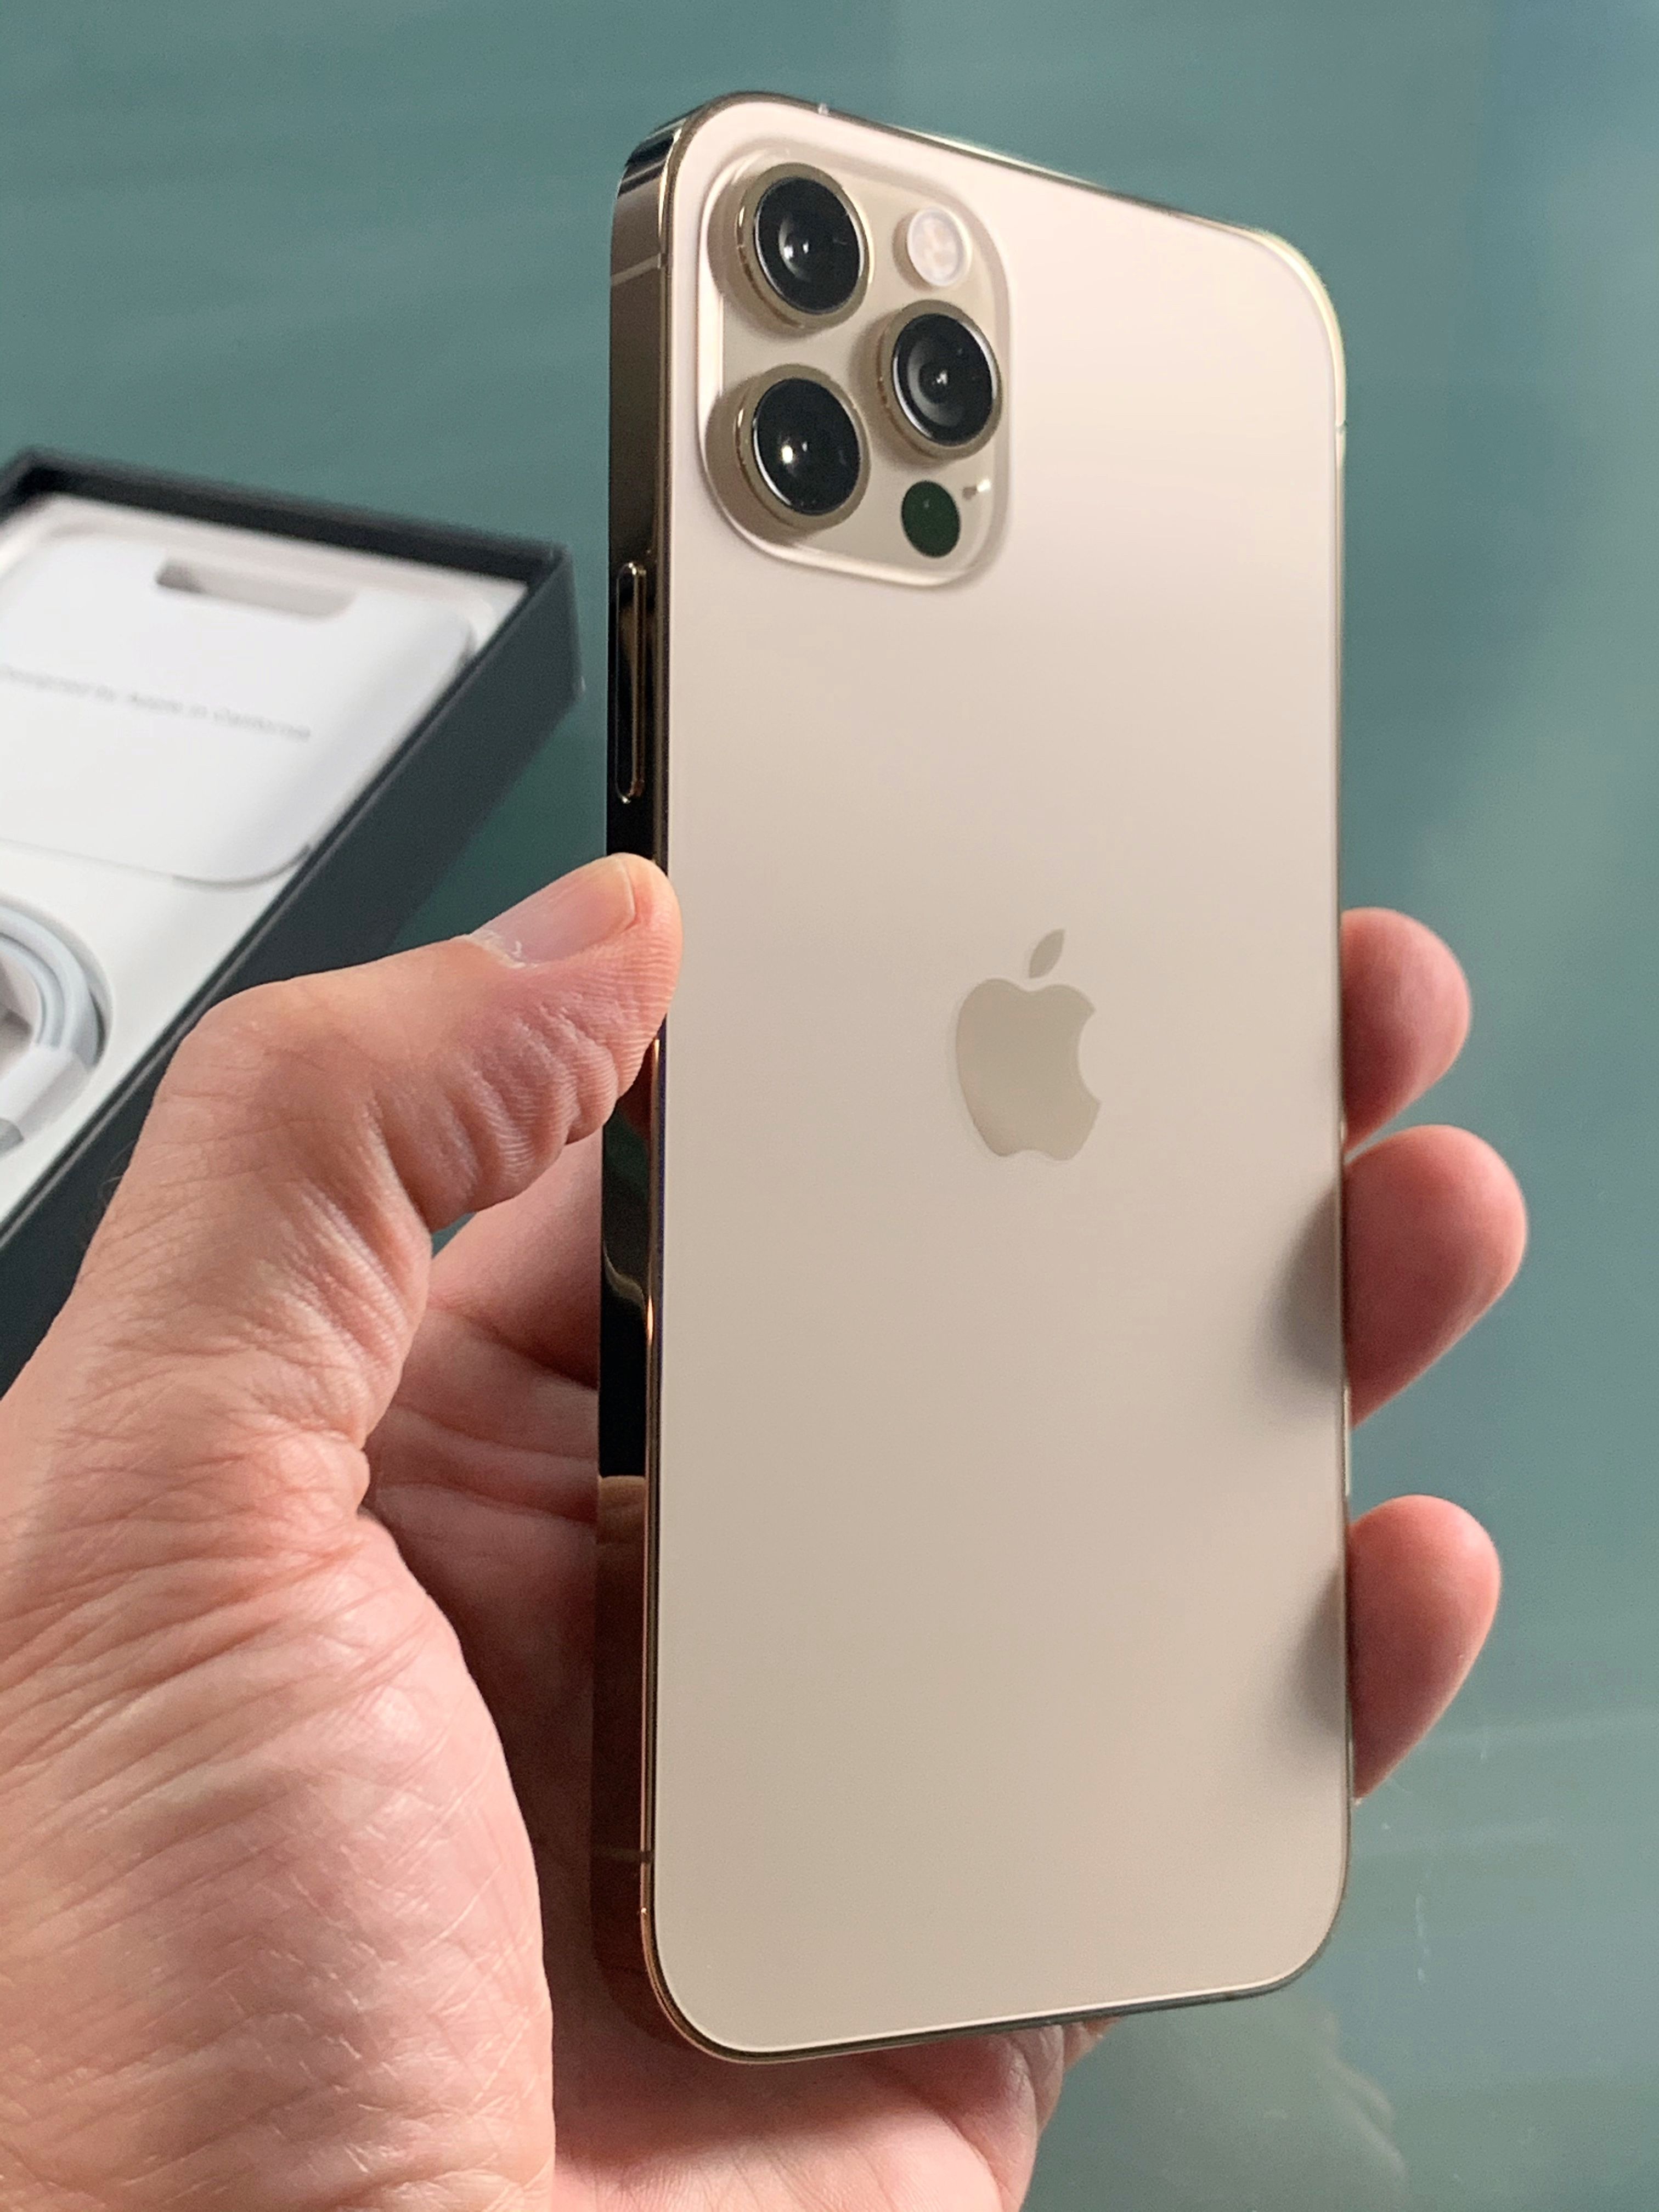 The Ultimate Guide to the iPhone 12 Pro: Features, Specifications, and More